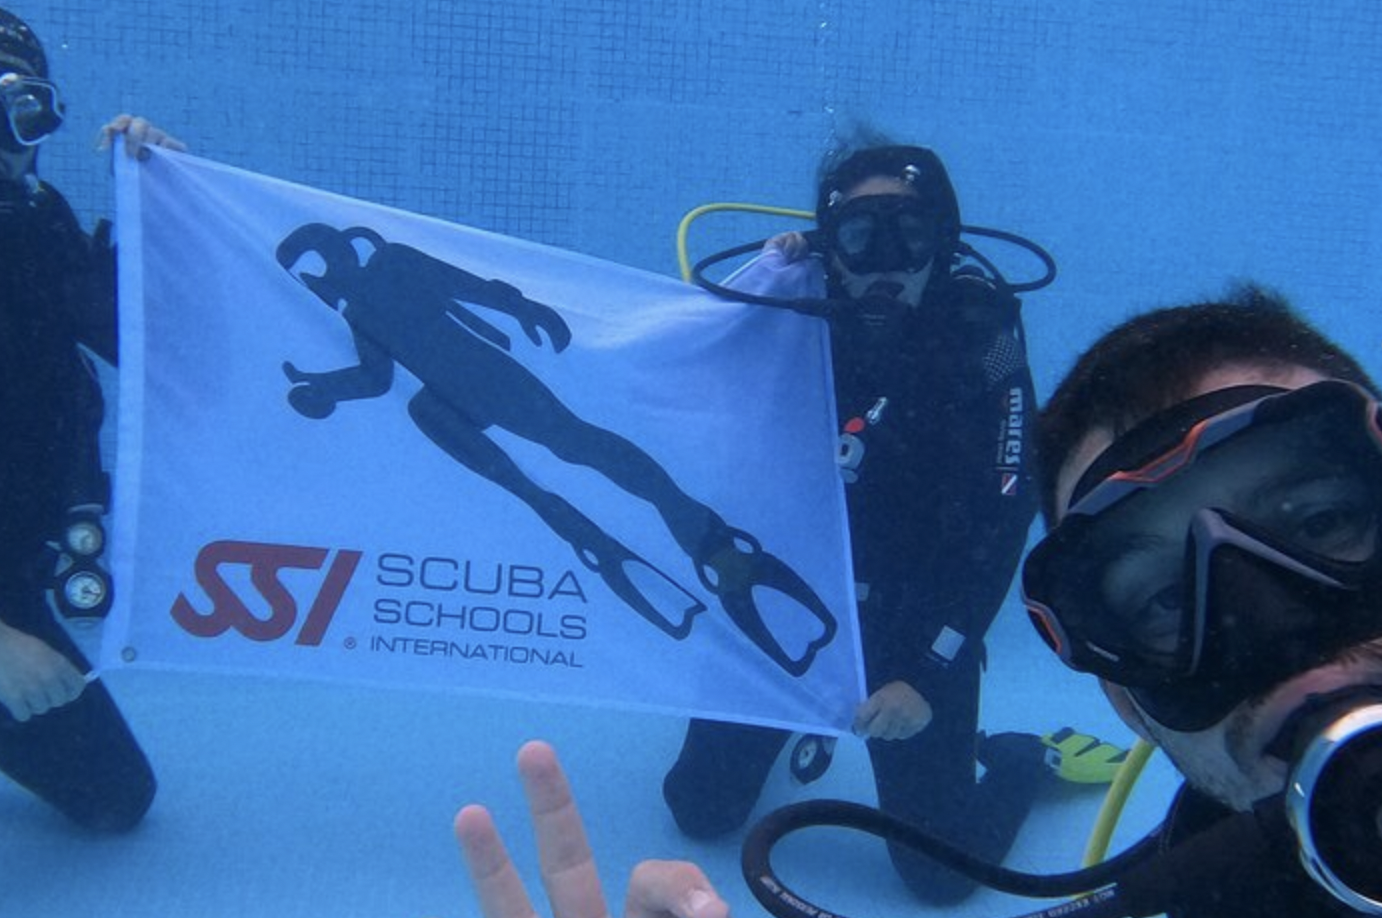 First Time Scuba Diving in Azores